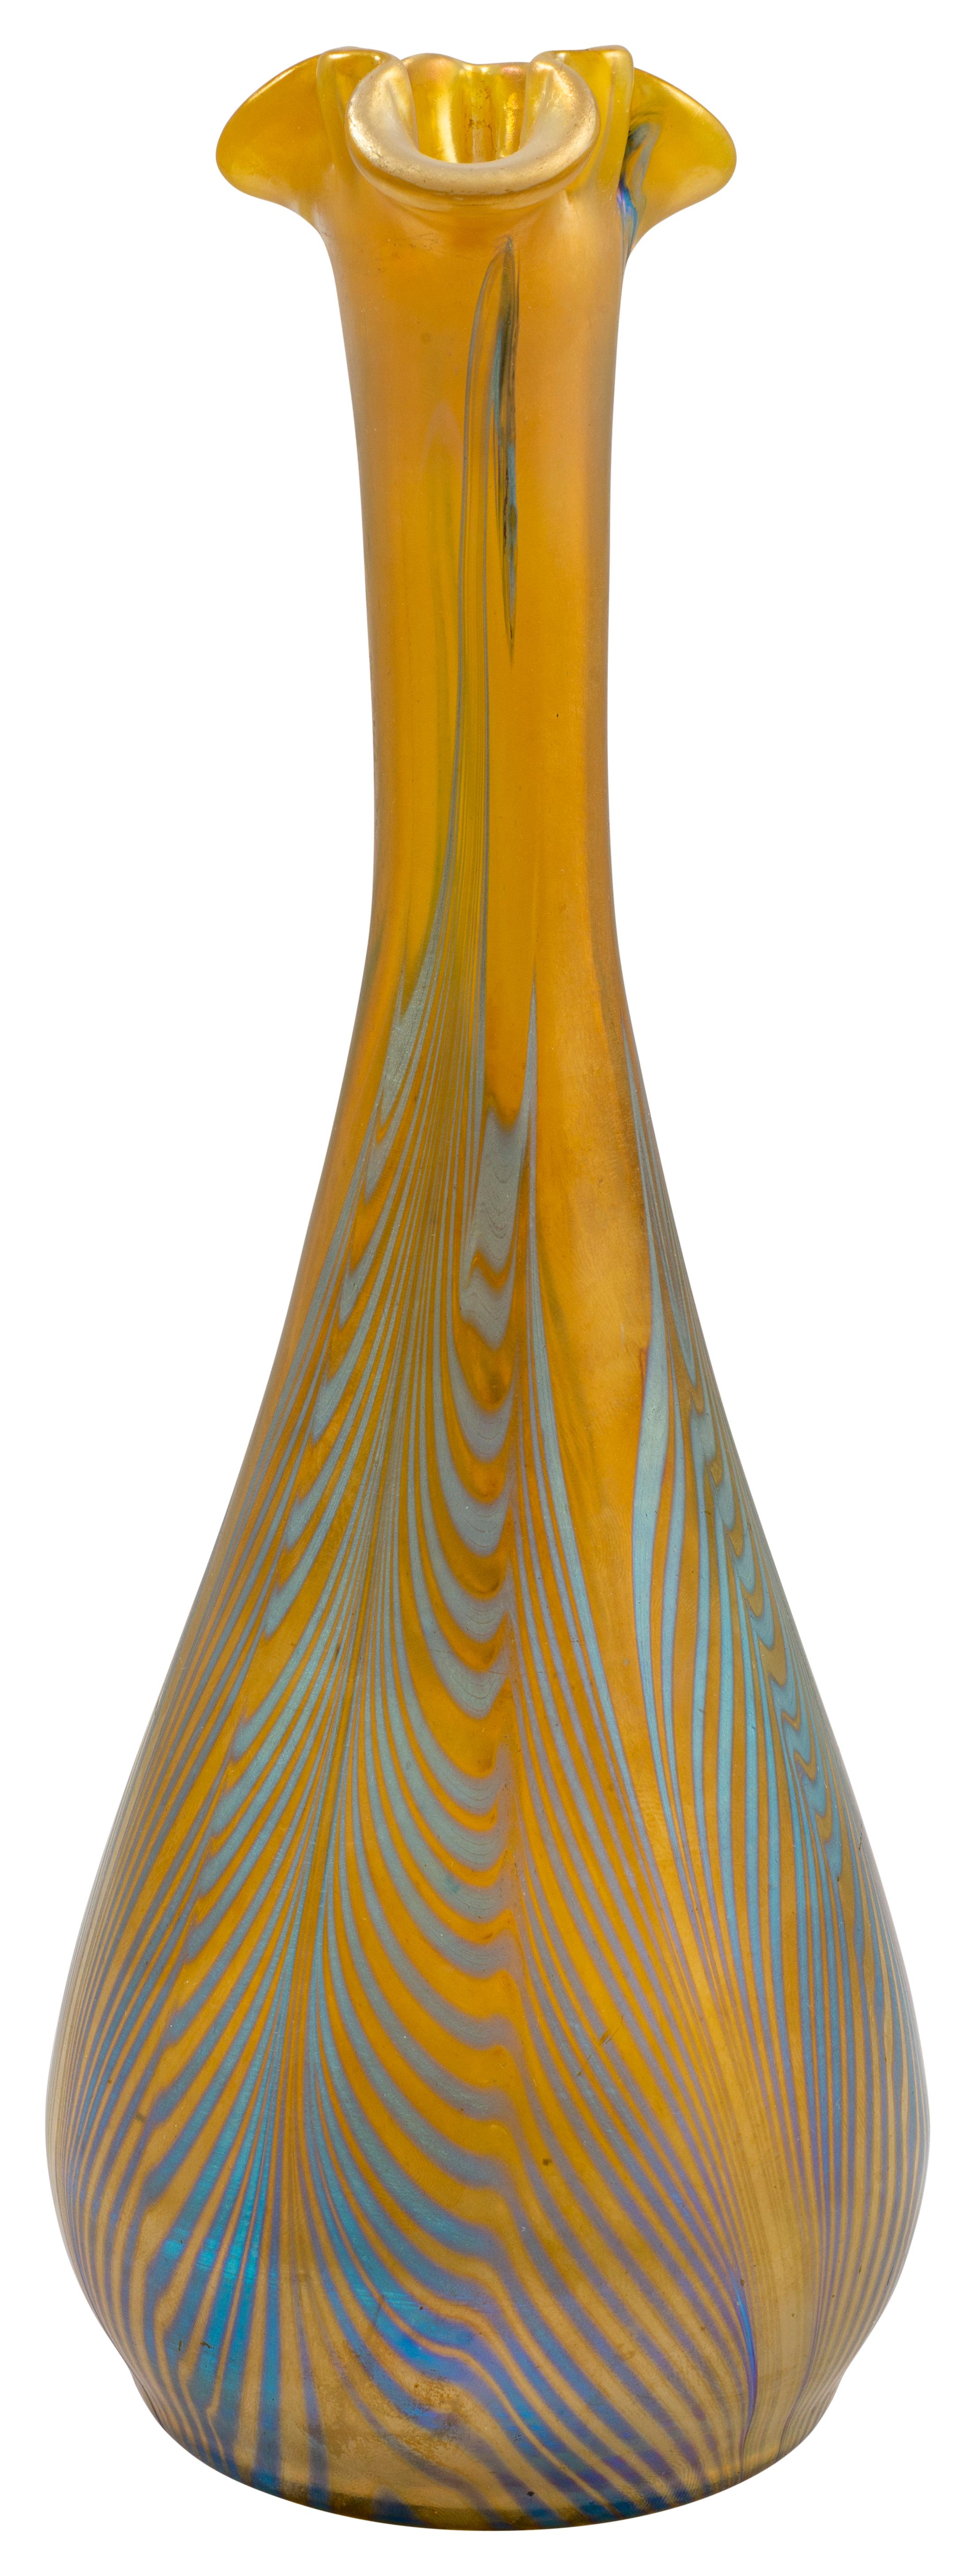 Bohemian Glass Vase Loetz Austrian Jugendstil Yellow circa 1901 decoration PG 1/154

One of the main reasons for the big success of Loetz at the Paris World Exhibition in 1900 was the use of bright, colourful decorations later to be known as